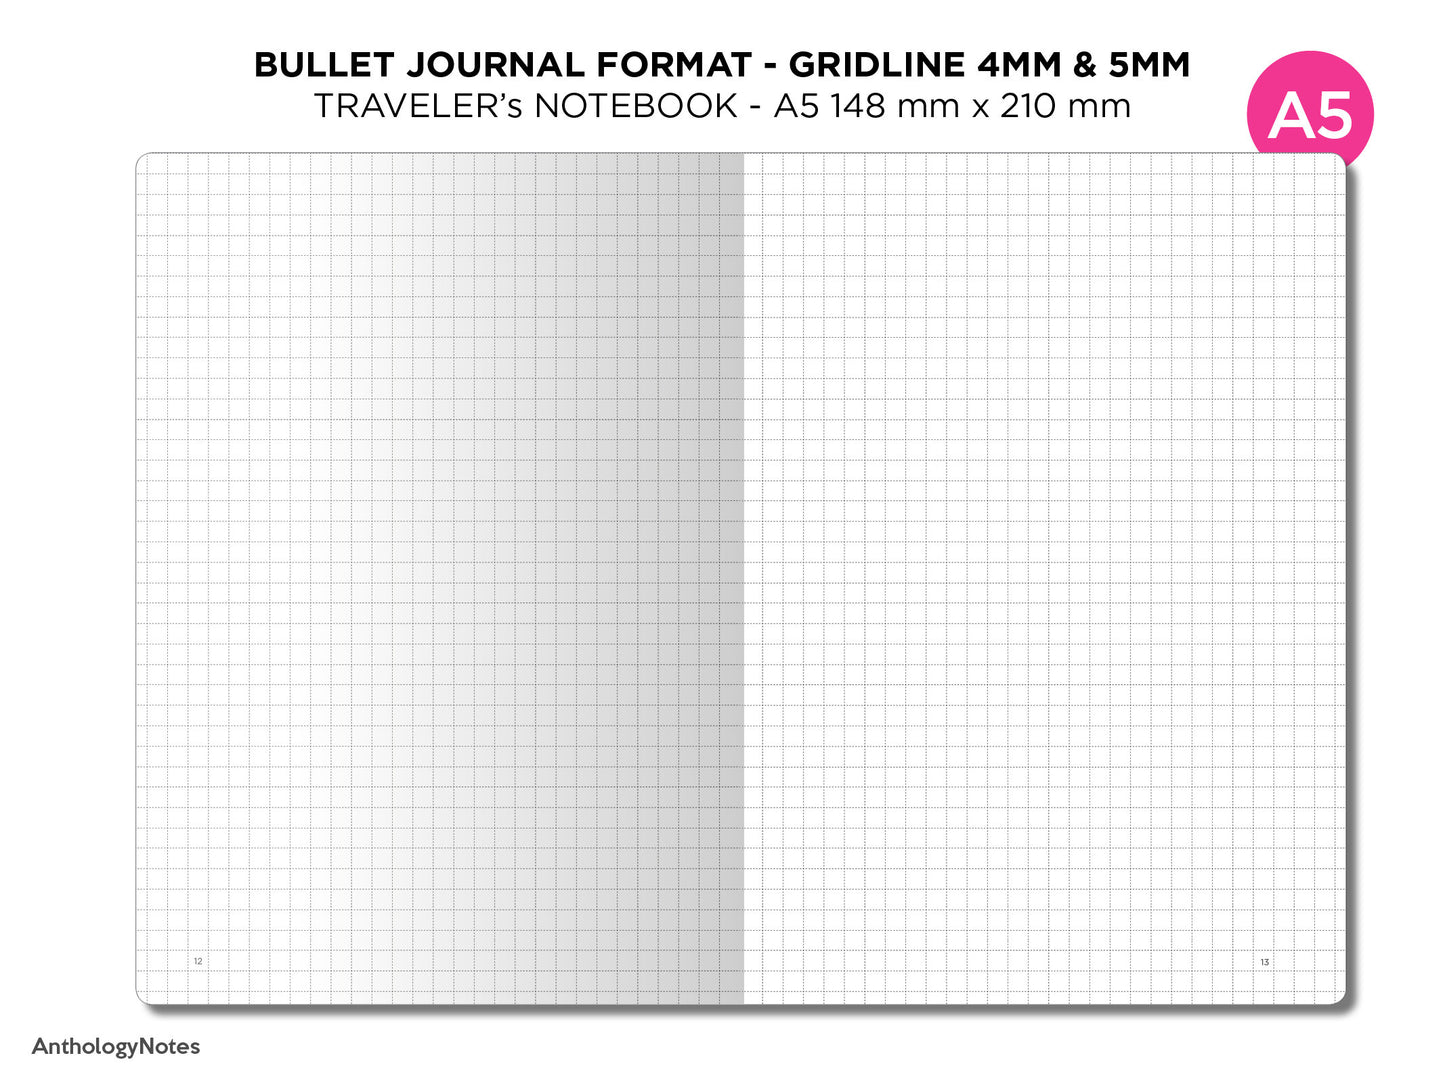 Bullet Log GRID - Traveler's Notebook A5 - Bujo Format - Numbered Pages, Key Page, Index Page - 5mm & 4mm